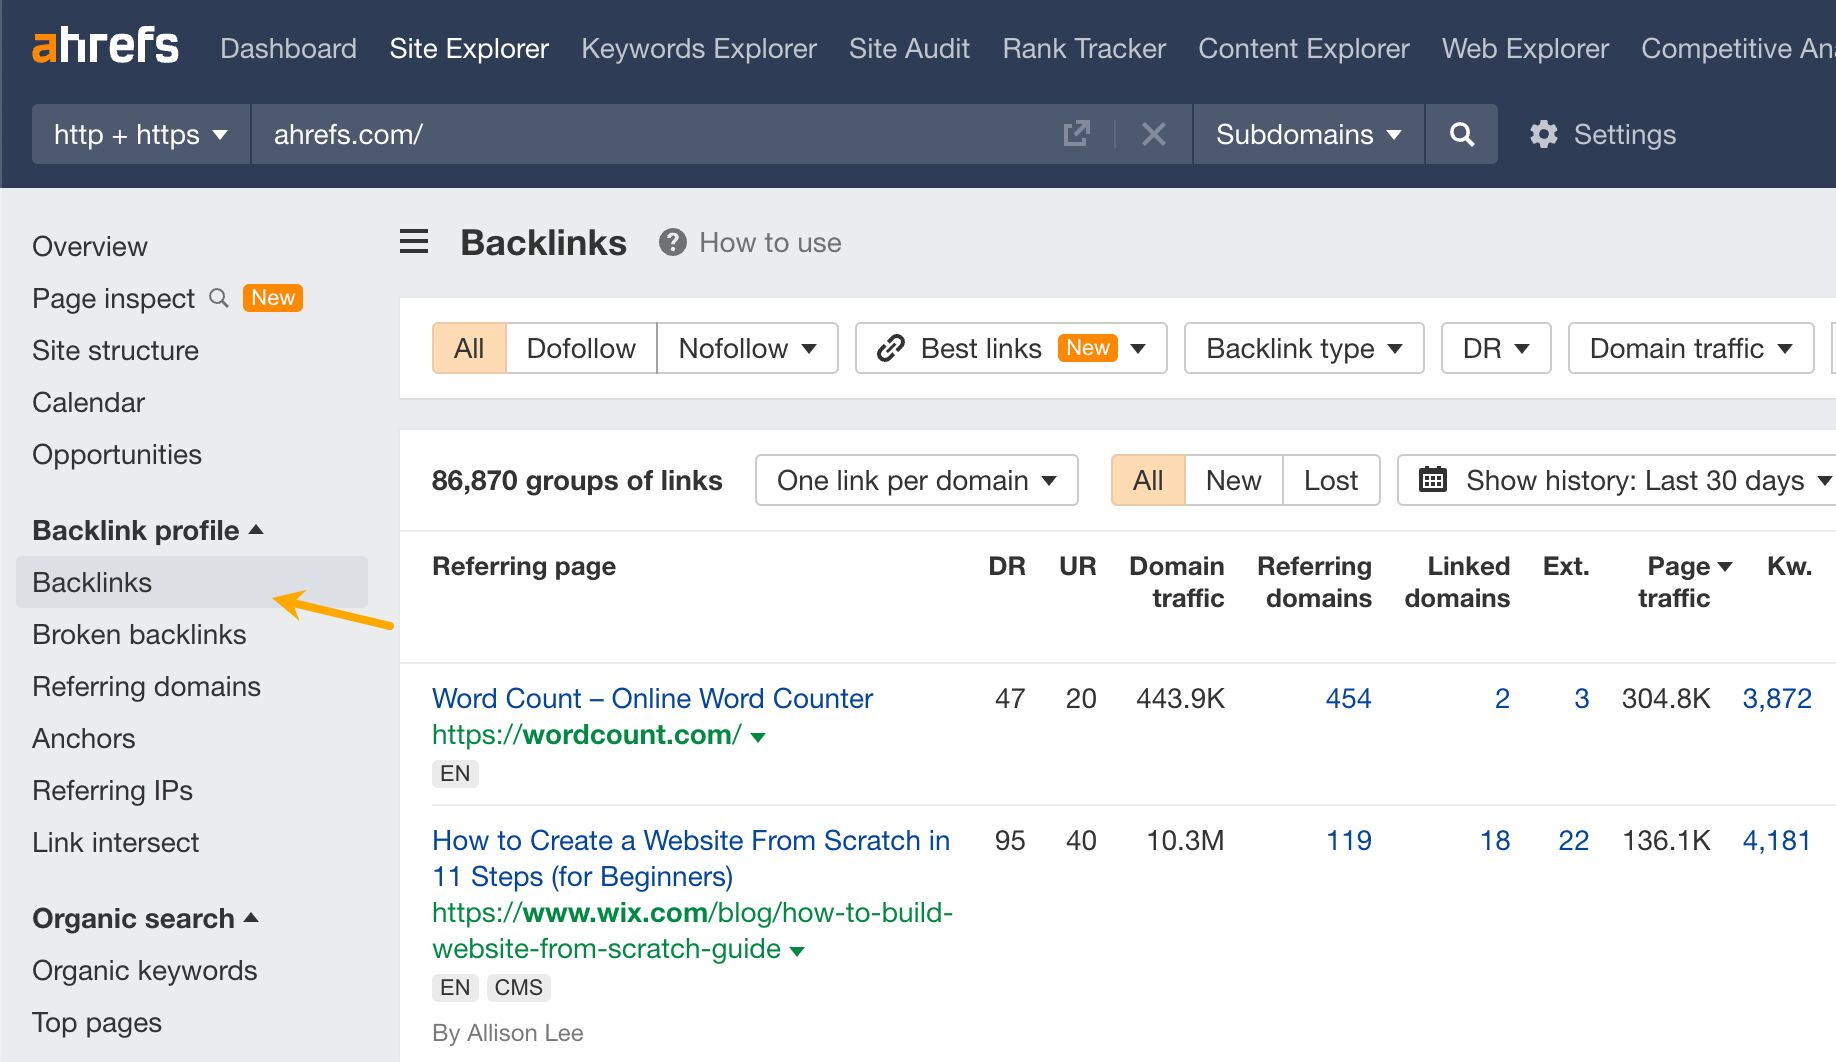 How to get Backlink data in Ahrefs.